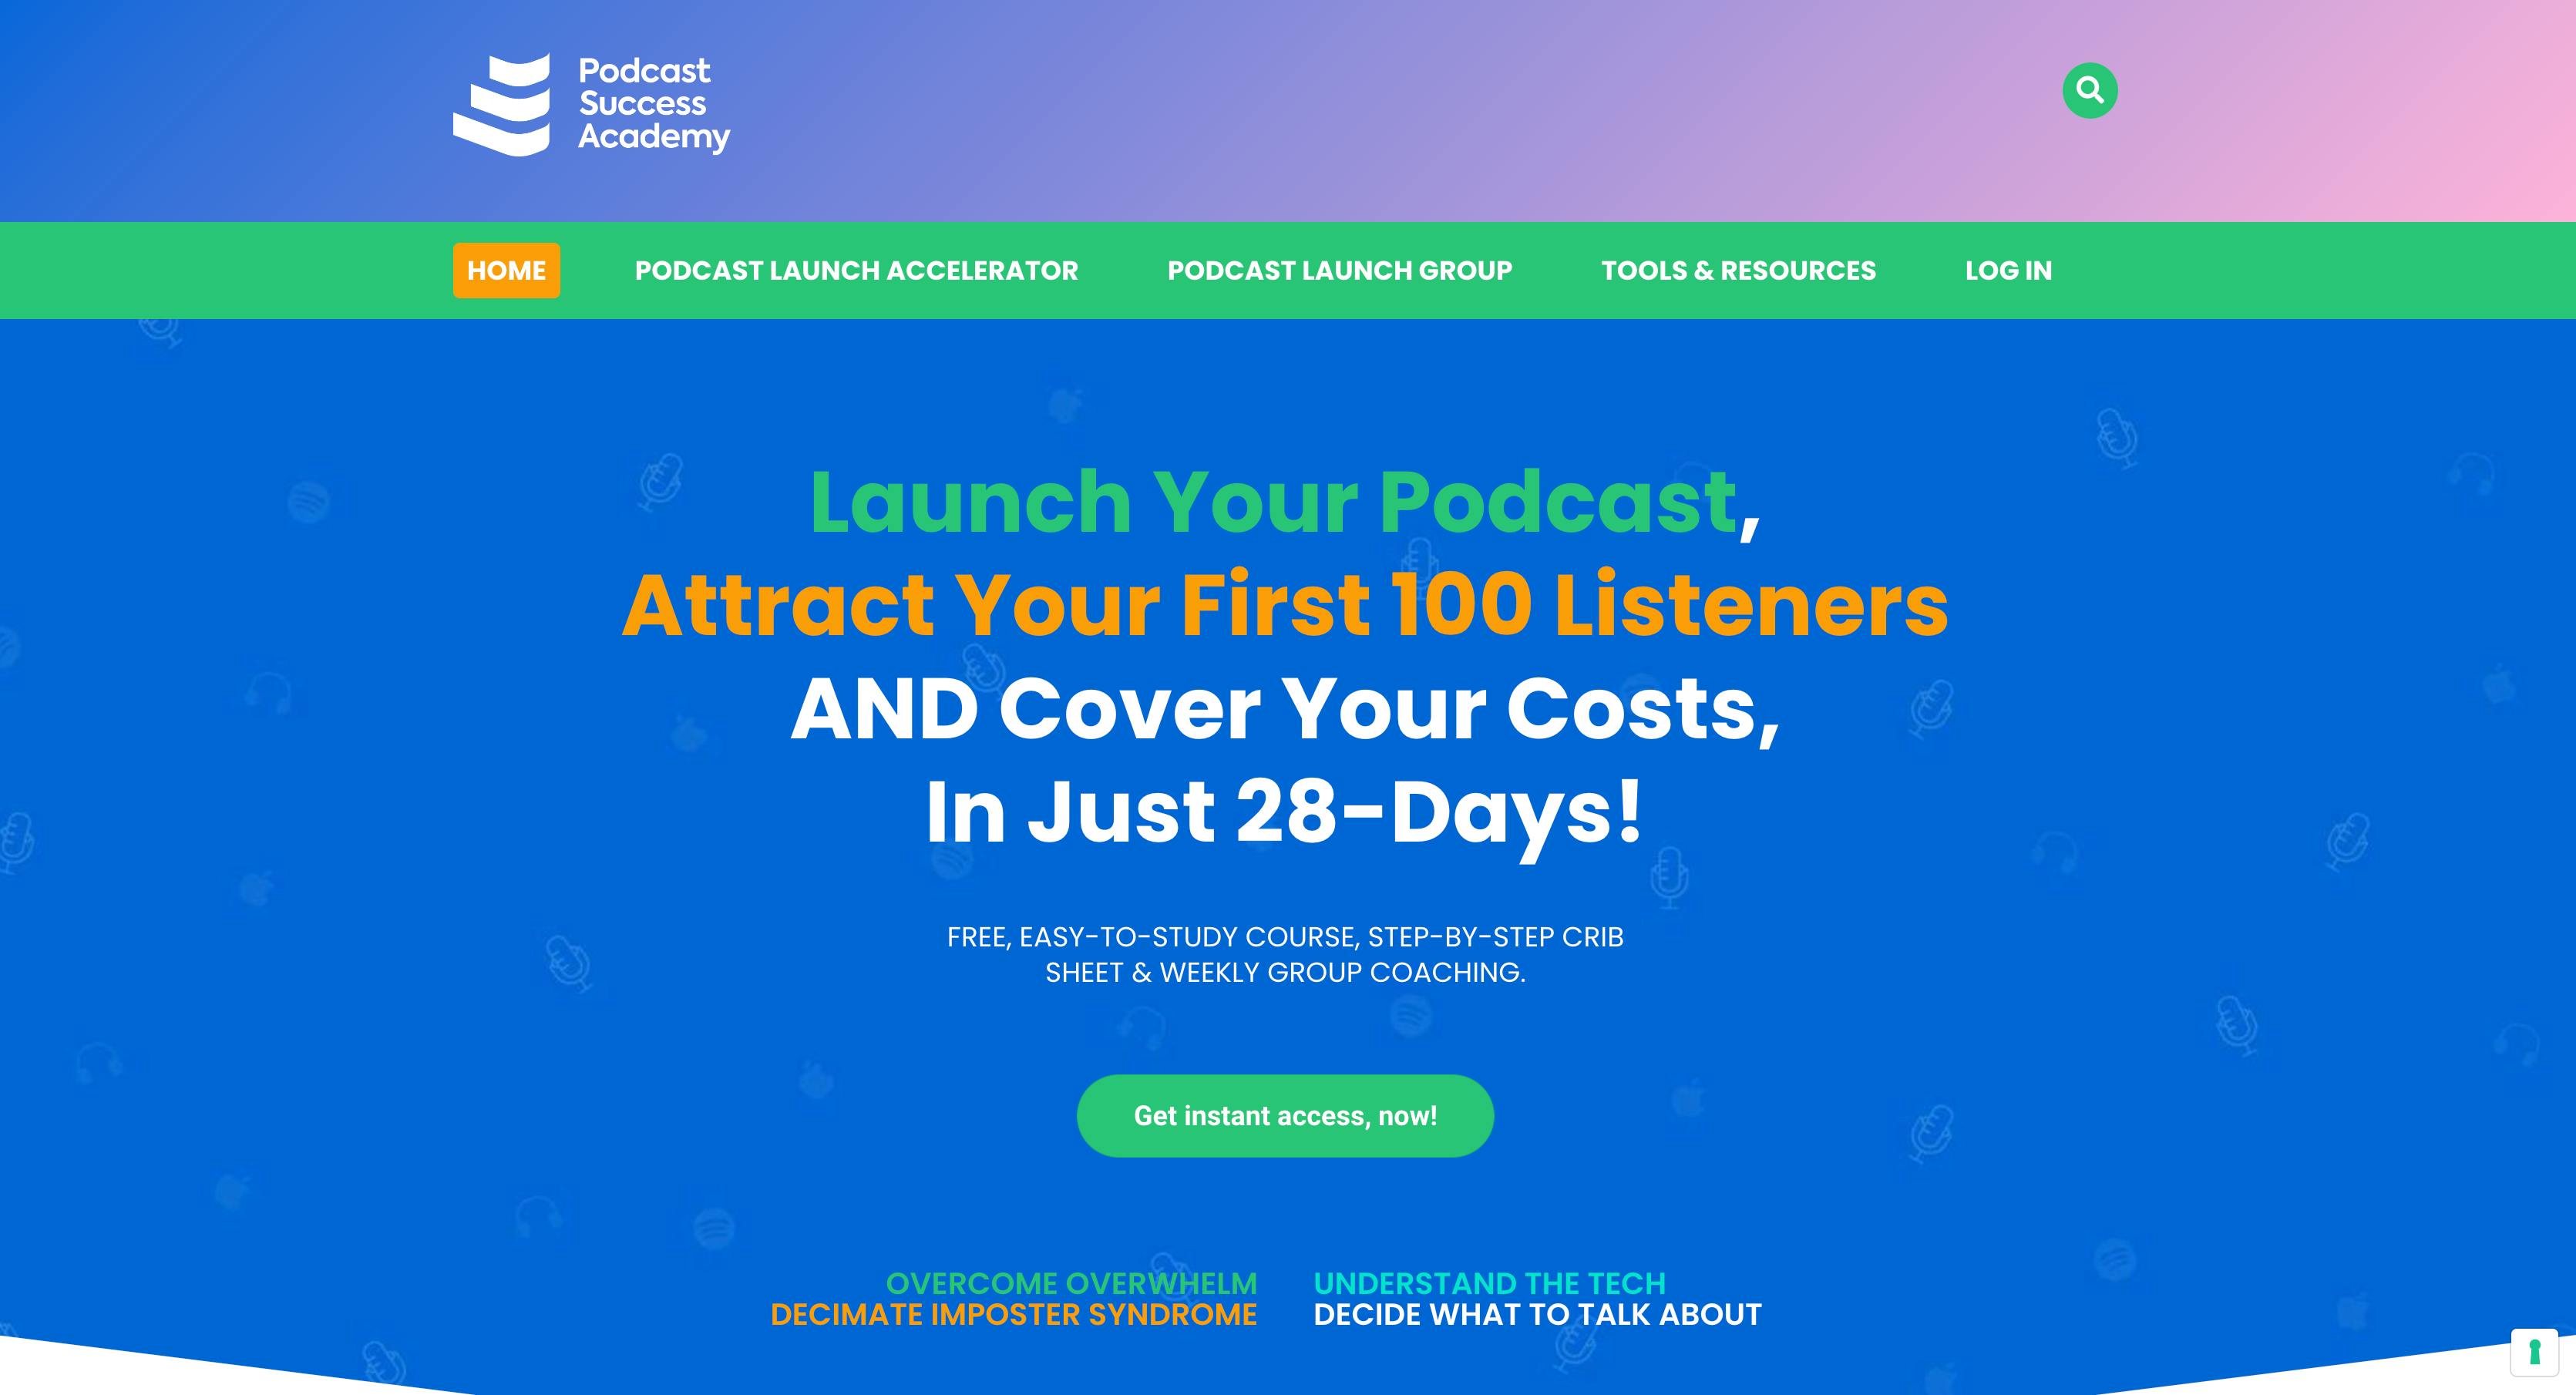 Podcast Launch Accelerator landing pagee with blue background, big white text, and a green button to enroll in the free podcast course